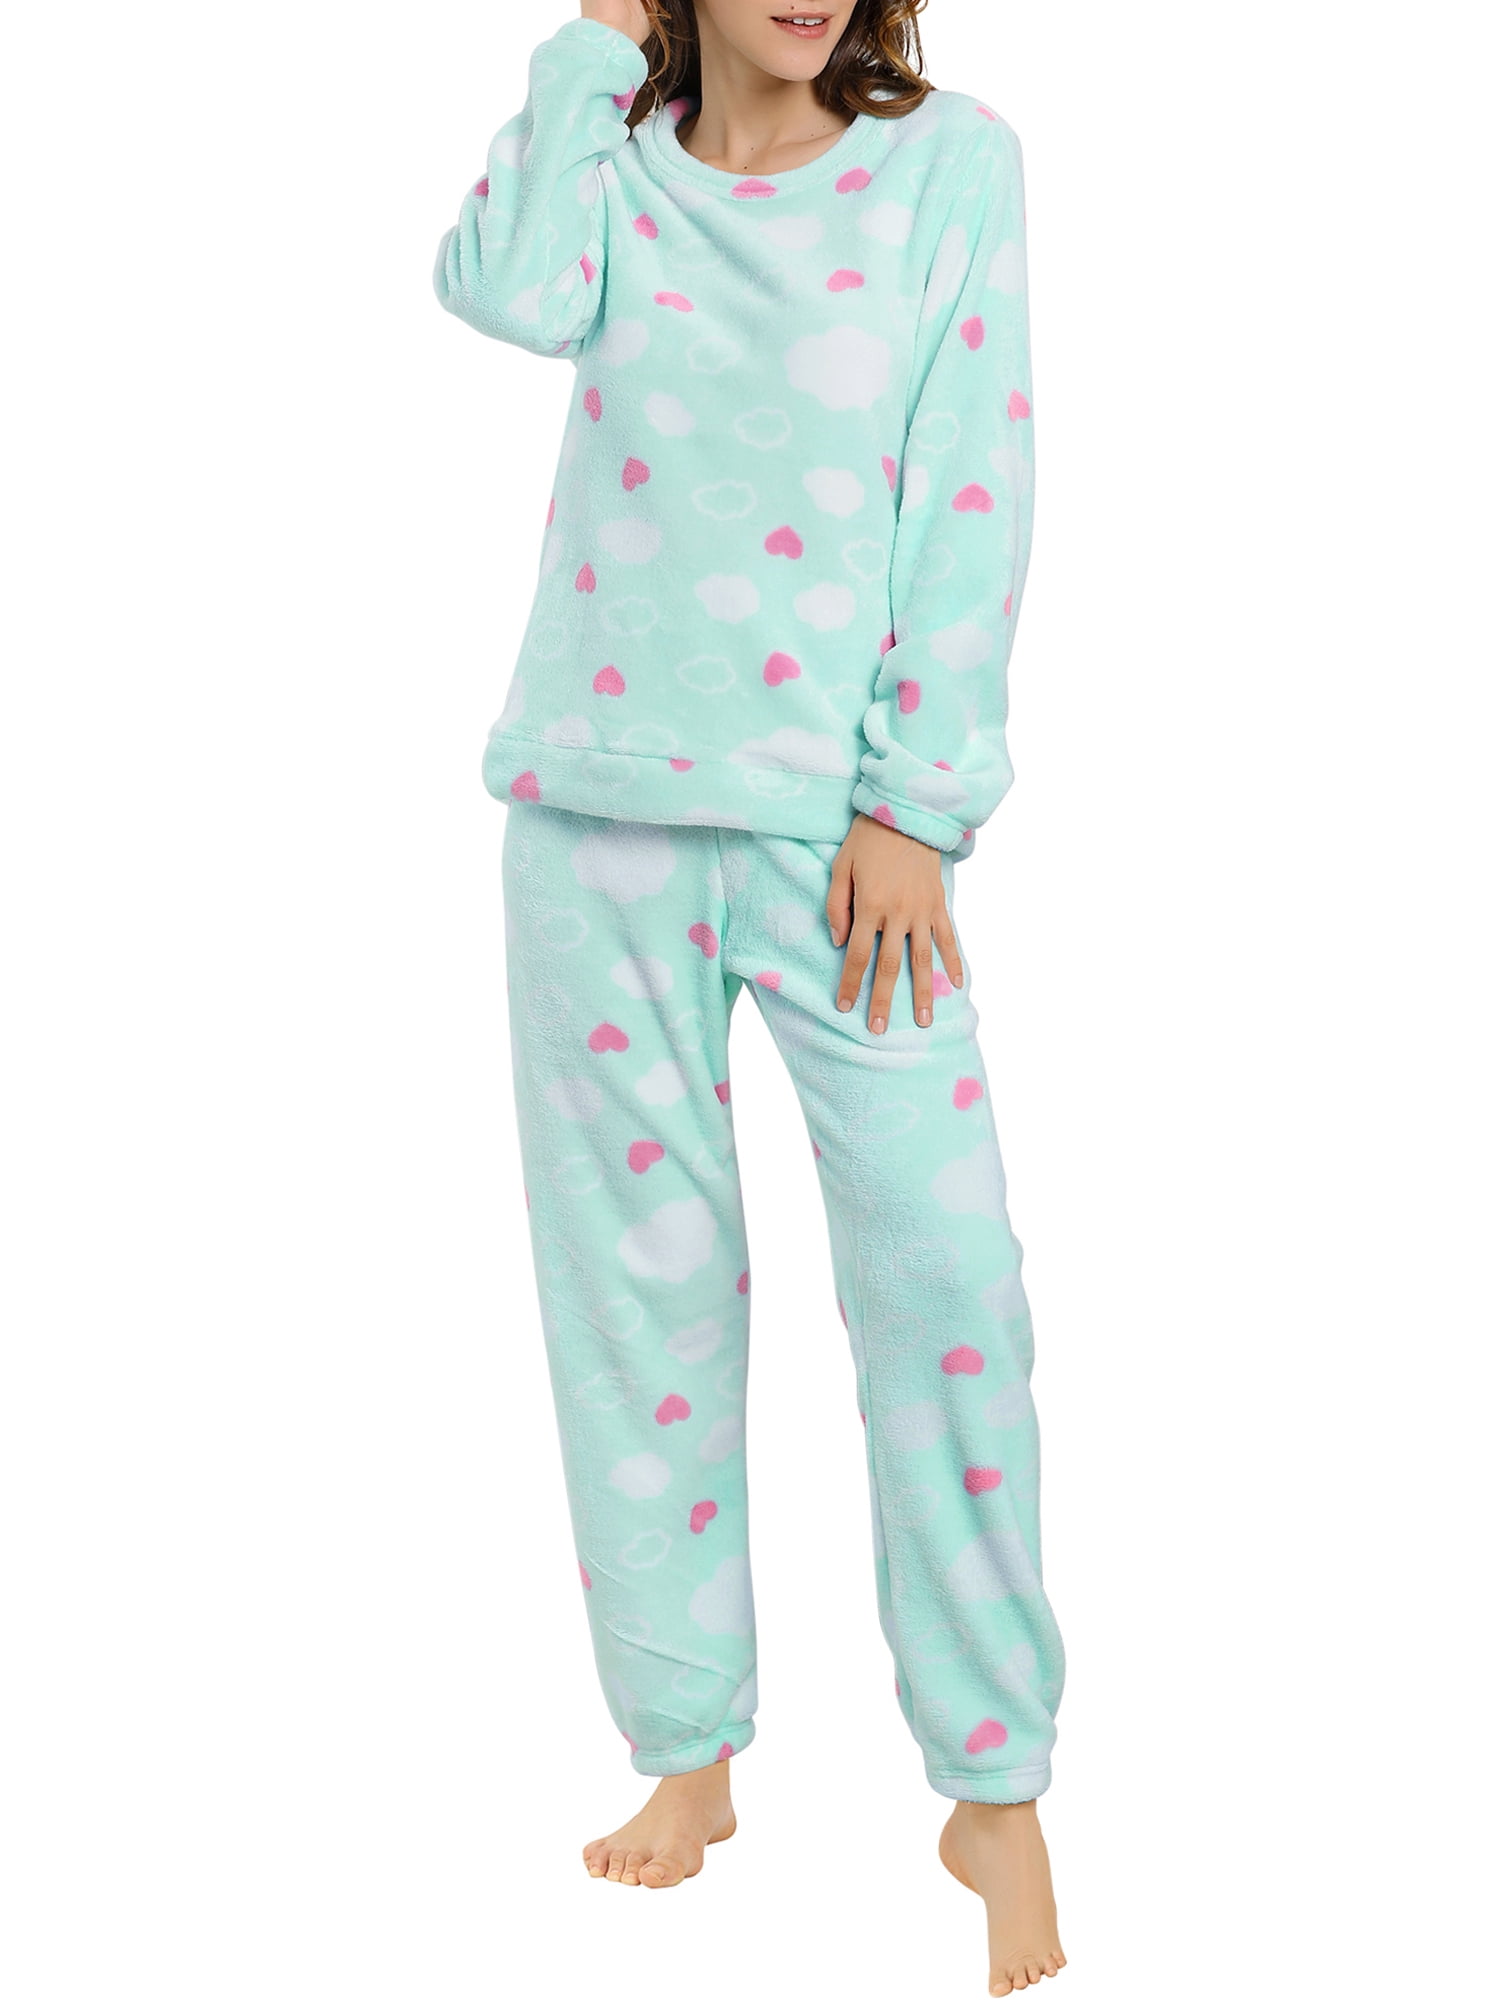 Sensis Gween Soft/Flannel Pajamas - Warm and Comfortable for Winter Nights